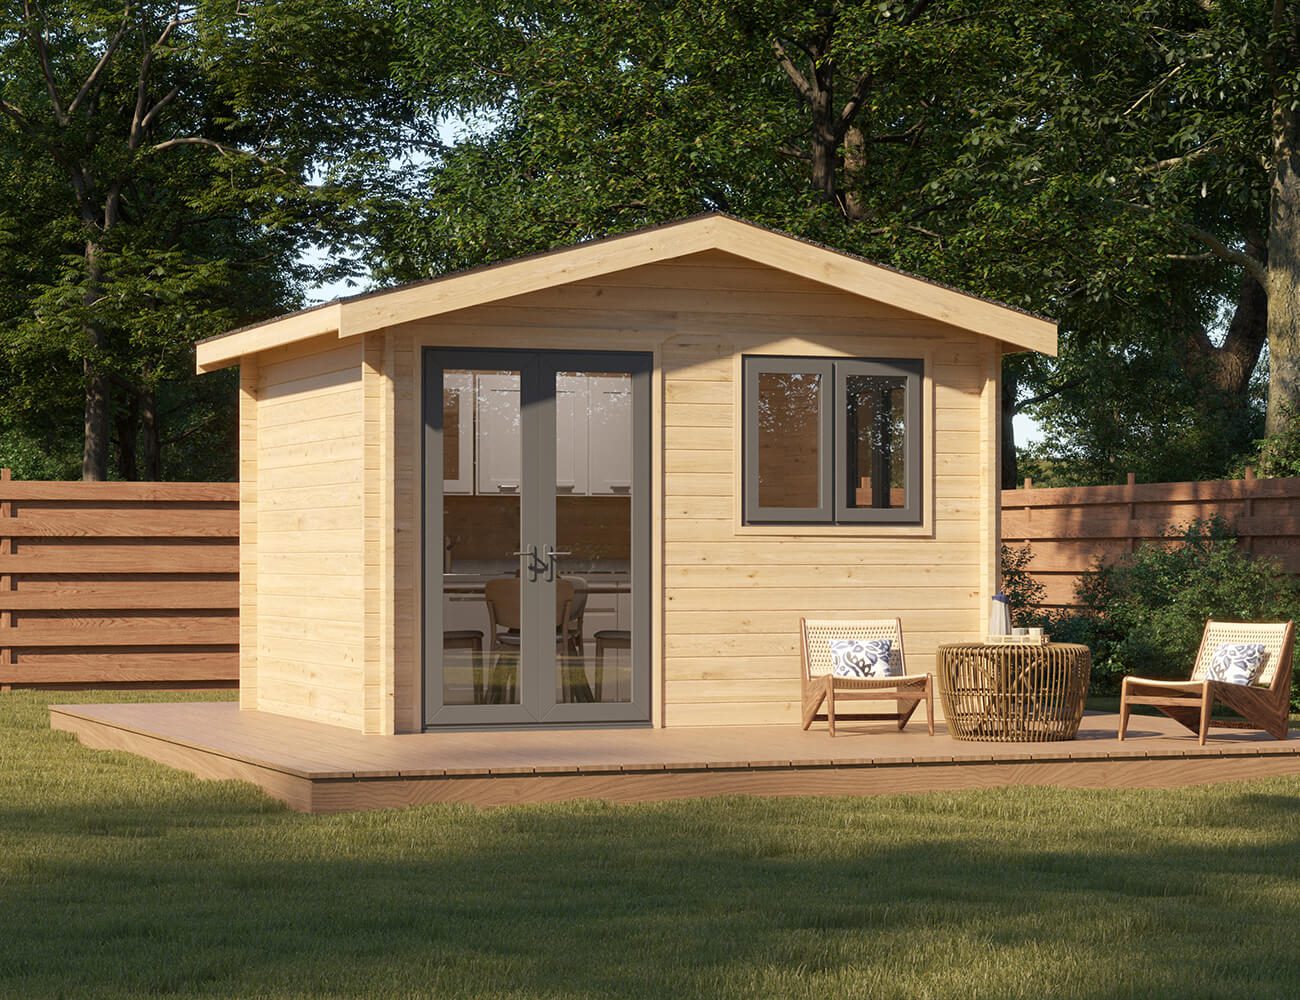 Wood cabin structures inspire us and reduce stress, studies show